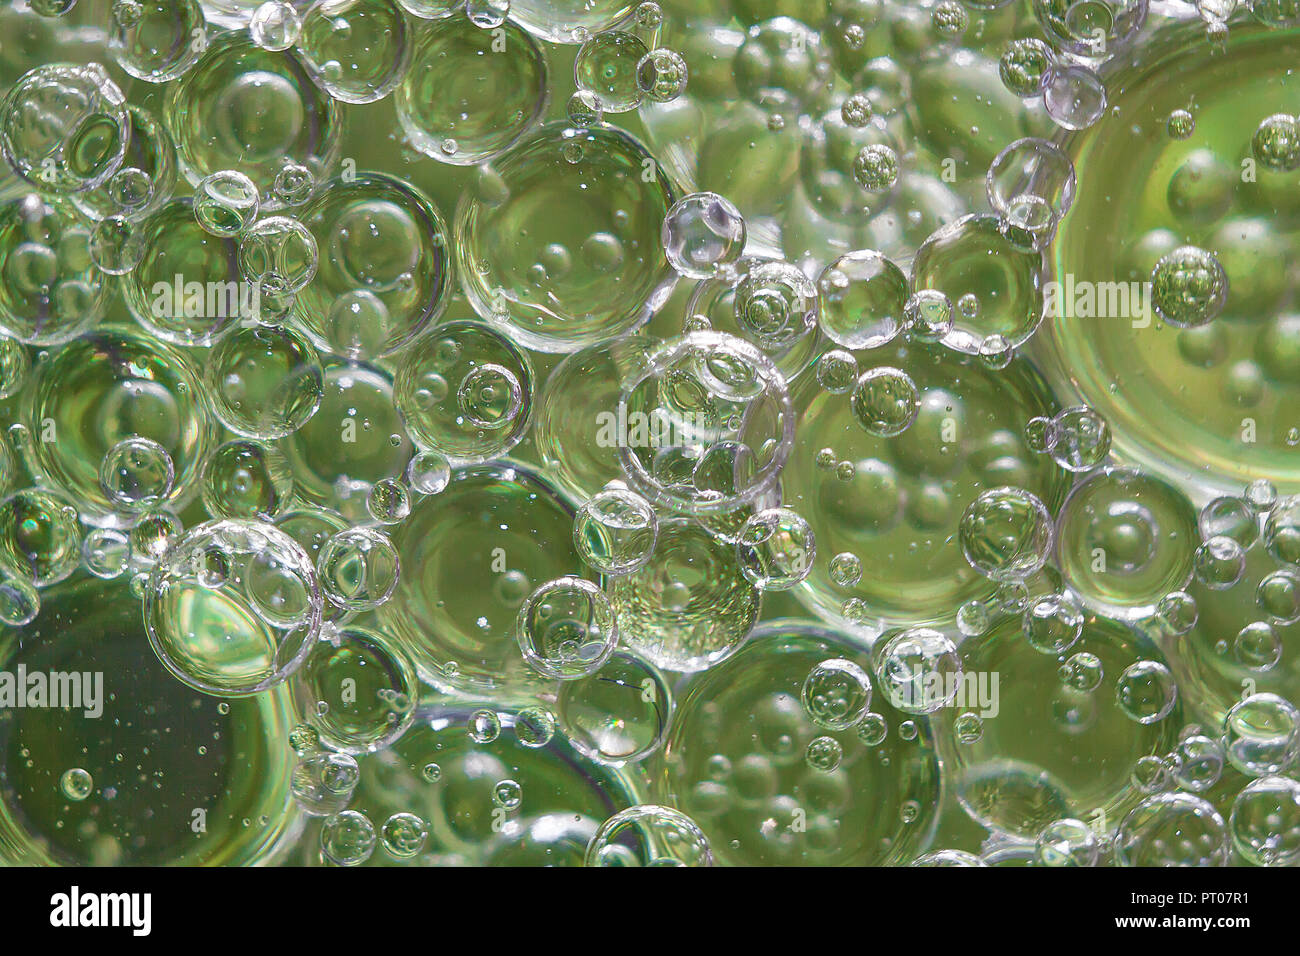 Abstract background of foam shampoo or soap Stock Photo